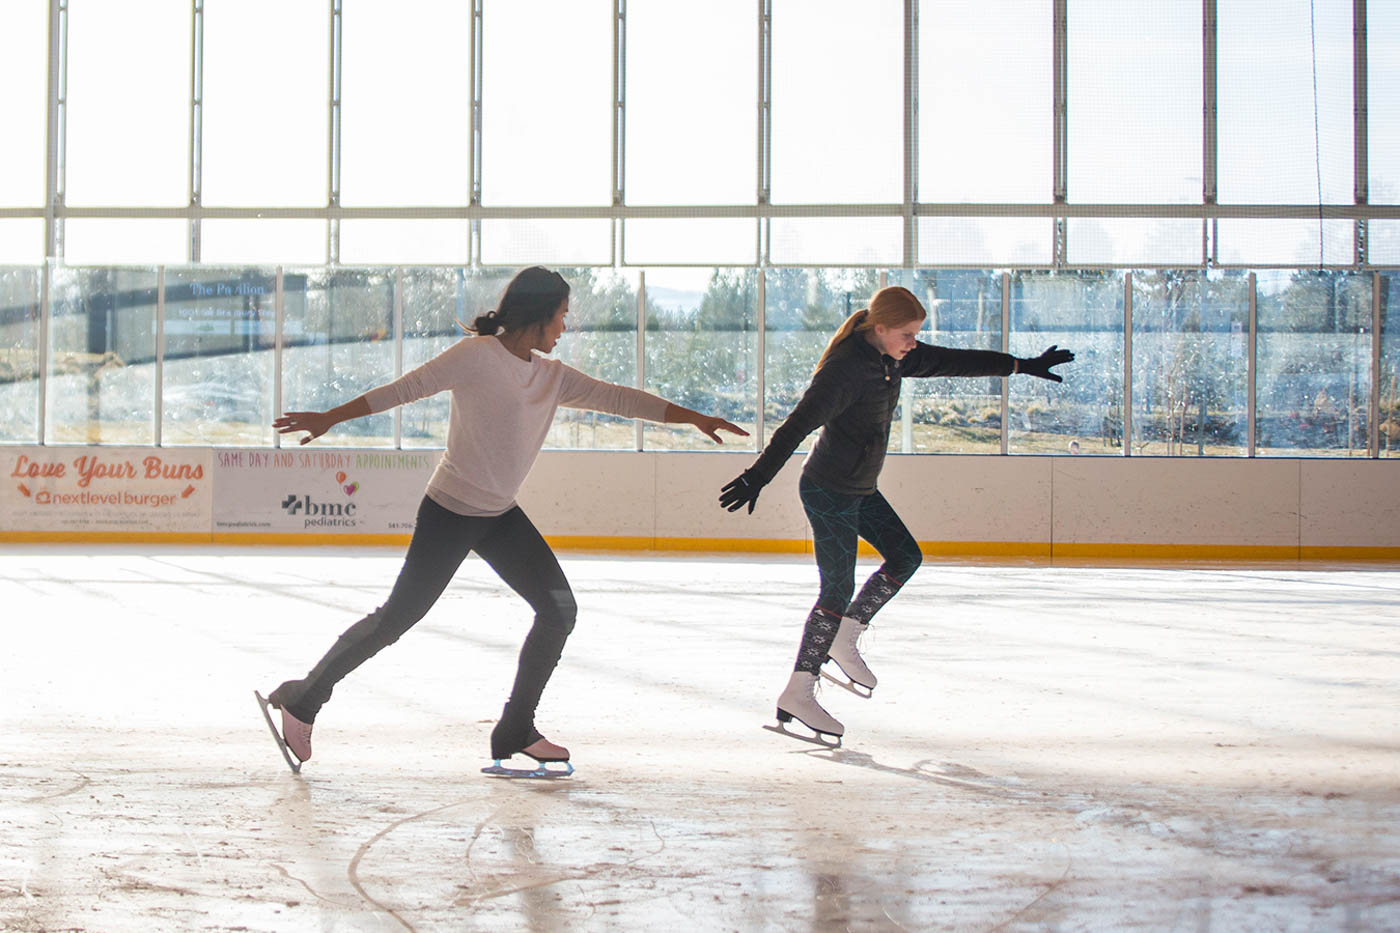 A young girl taking private skate lessons at the Pavilion in Bend.